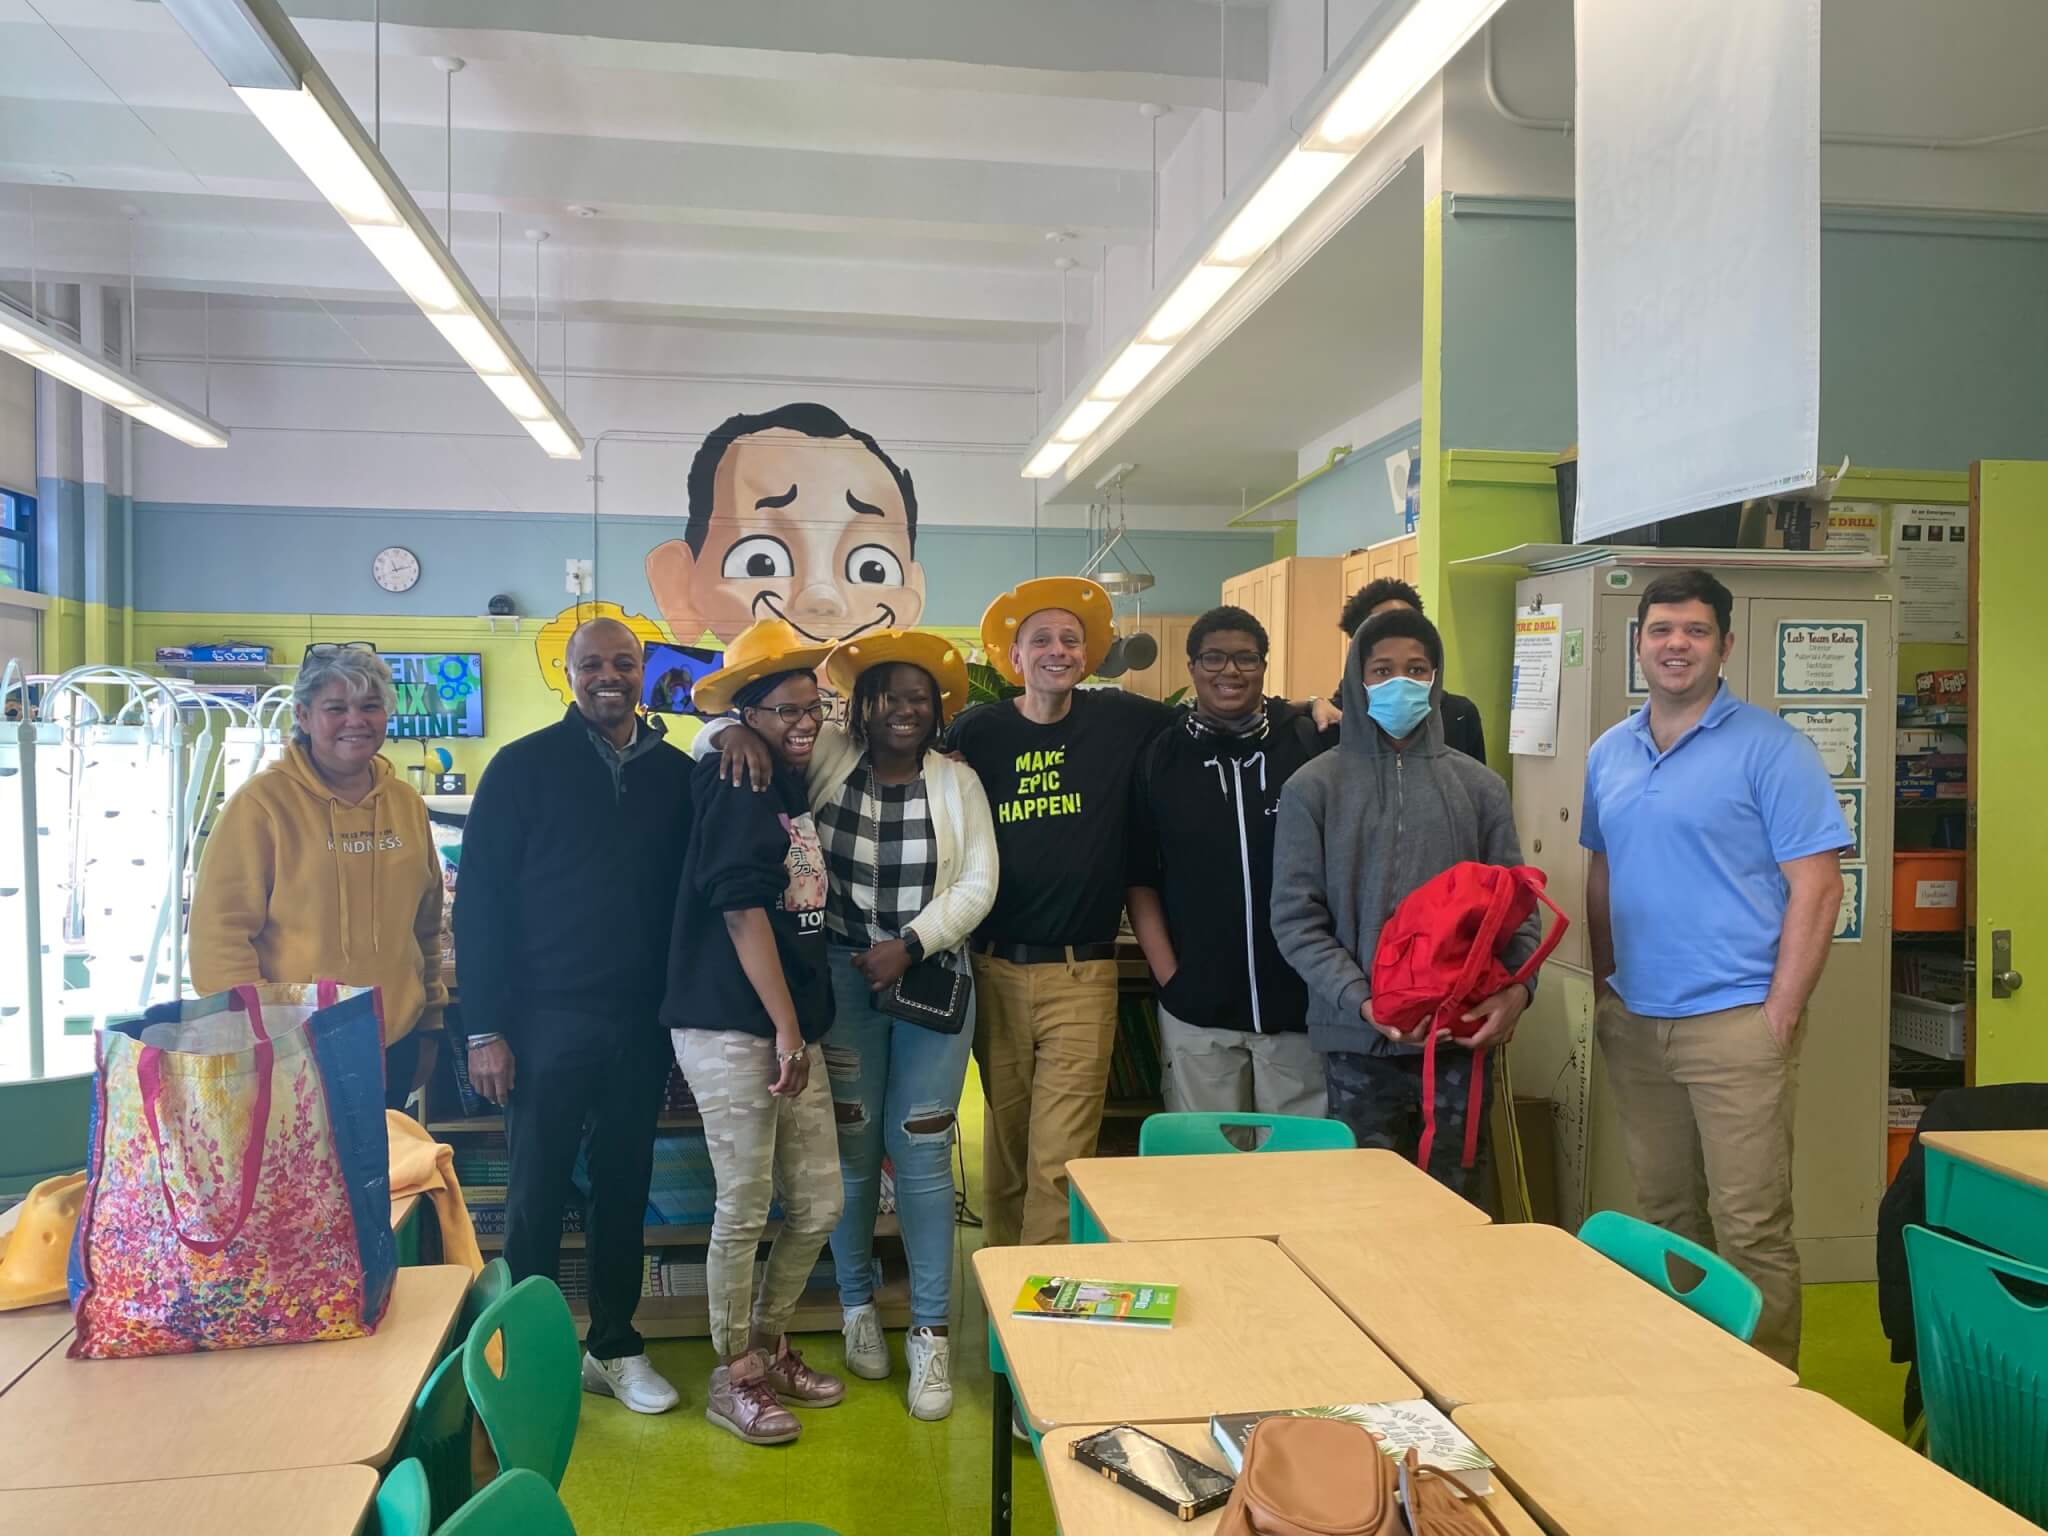 Group photo of Stem Academy Local Leaders with Mr. and Mrs. Ritz of the Green Bronx Machine - blue/green in the background along with a cartoon mural of Mr. Ritz, and bright white tower gardens to the side. In front of them are a few beige desks with bright green chairs.